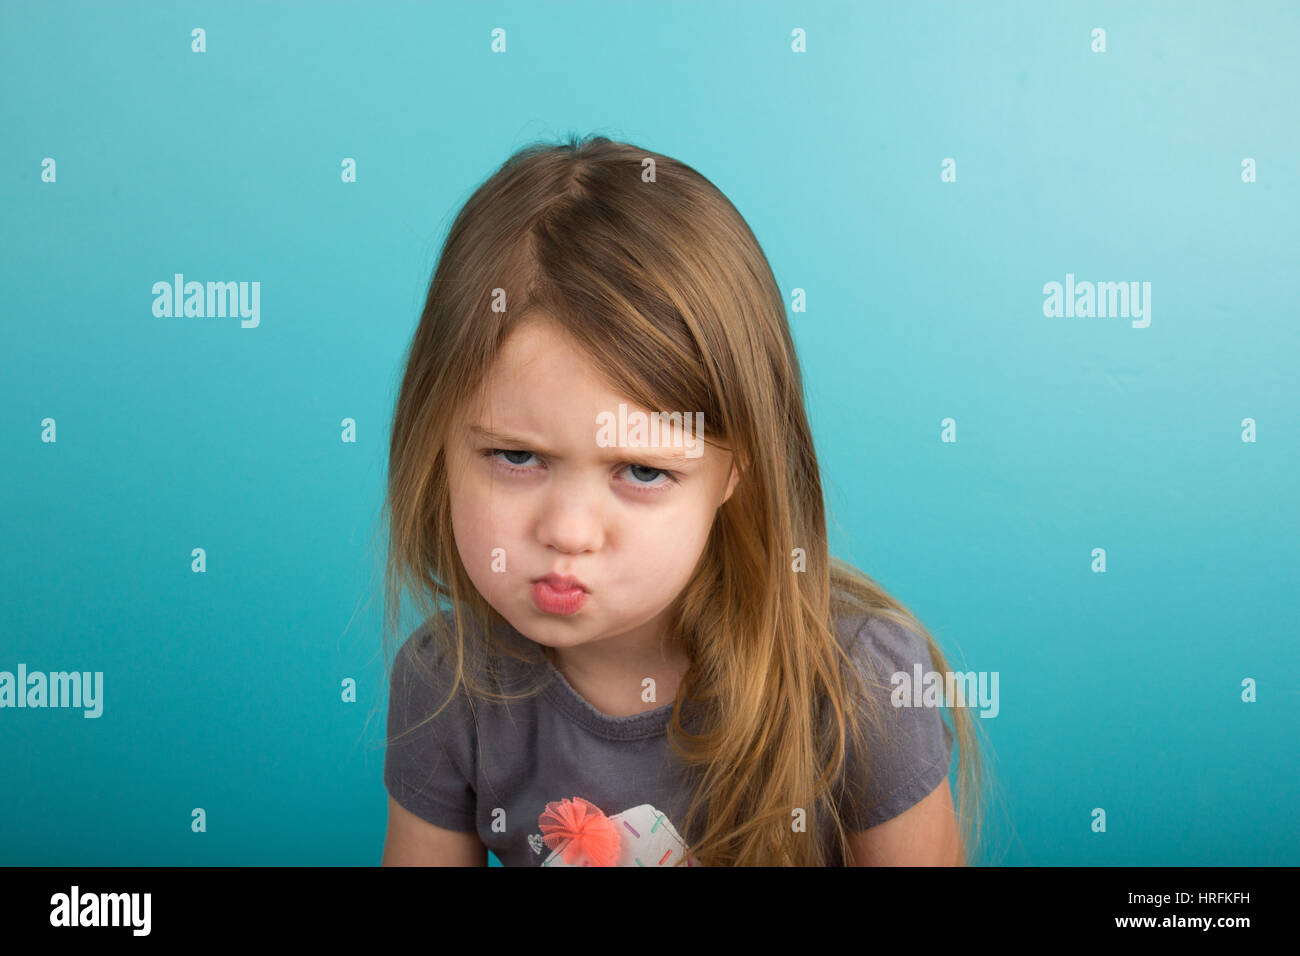 Little girl with sassy expression Stock Photo